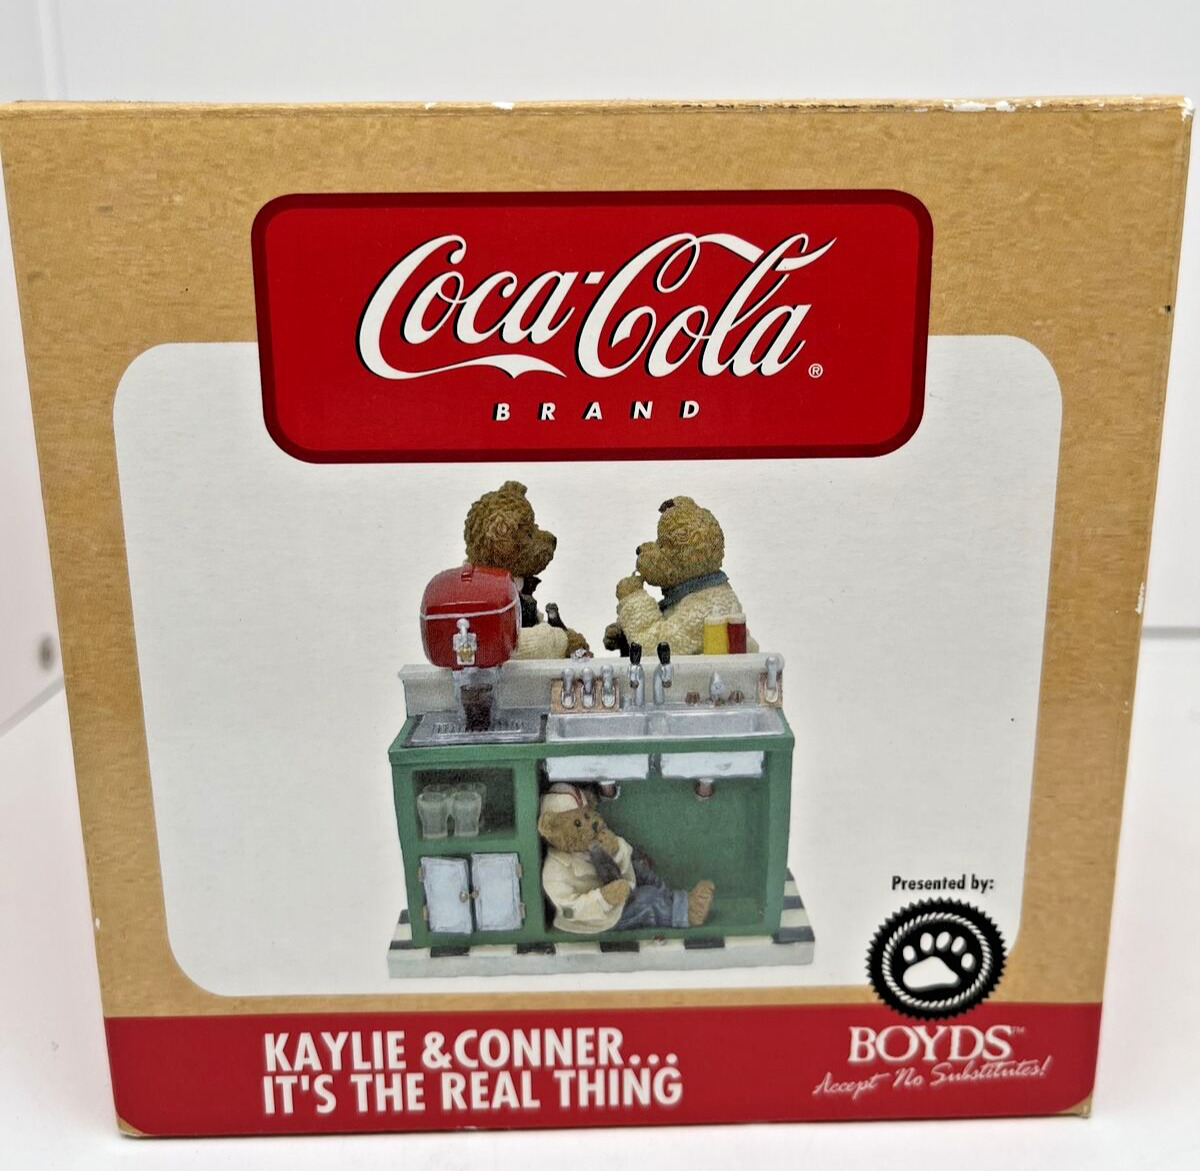 2005 Coke Coca Cola Boyds Bear Kaylie Conner Its The Real Thing Soda Figurine